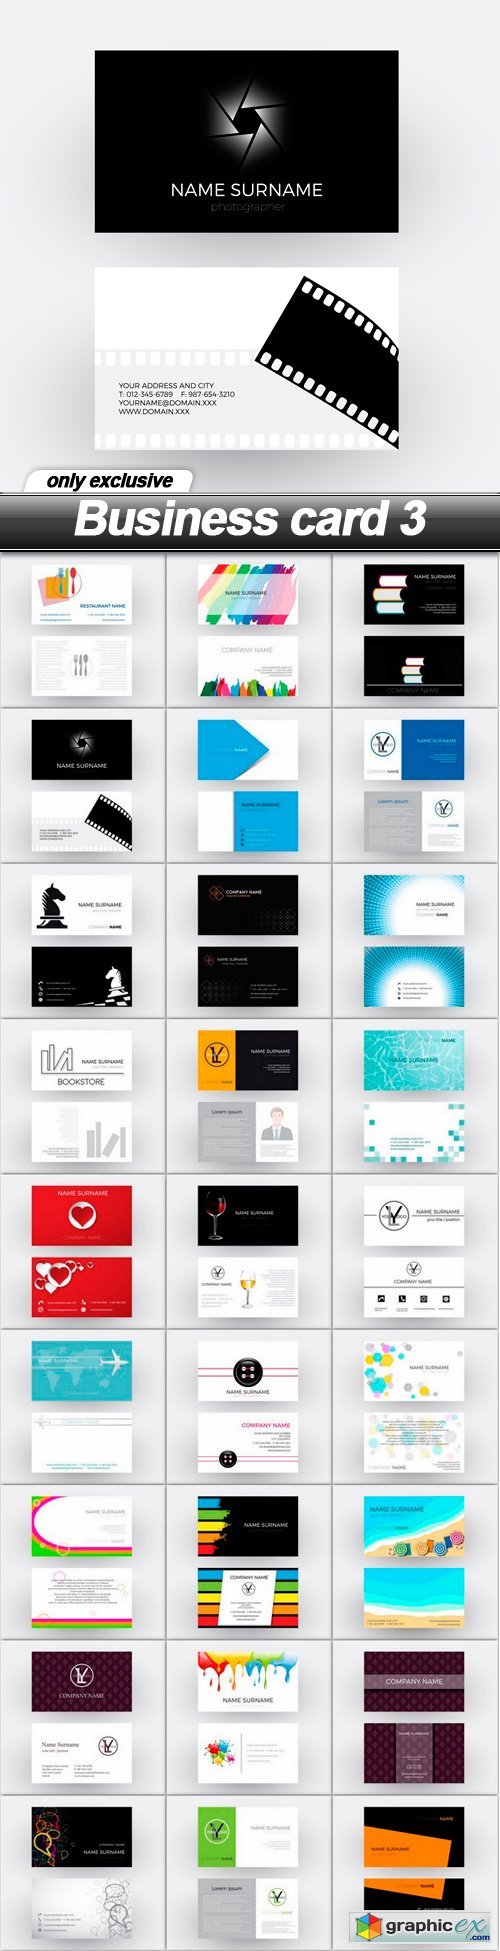 Business card 3 - 27 EPS